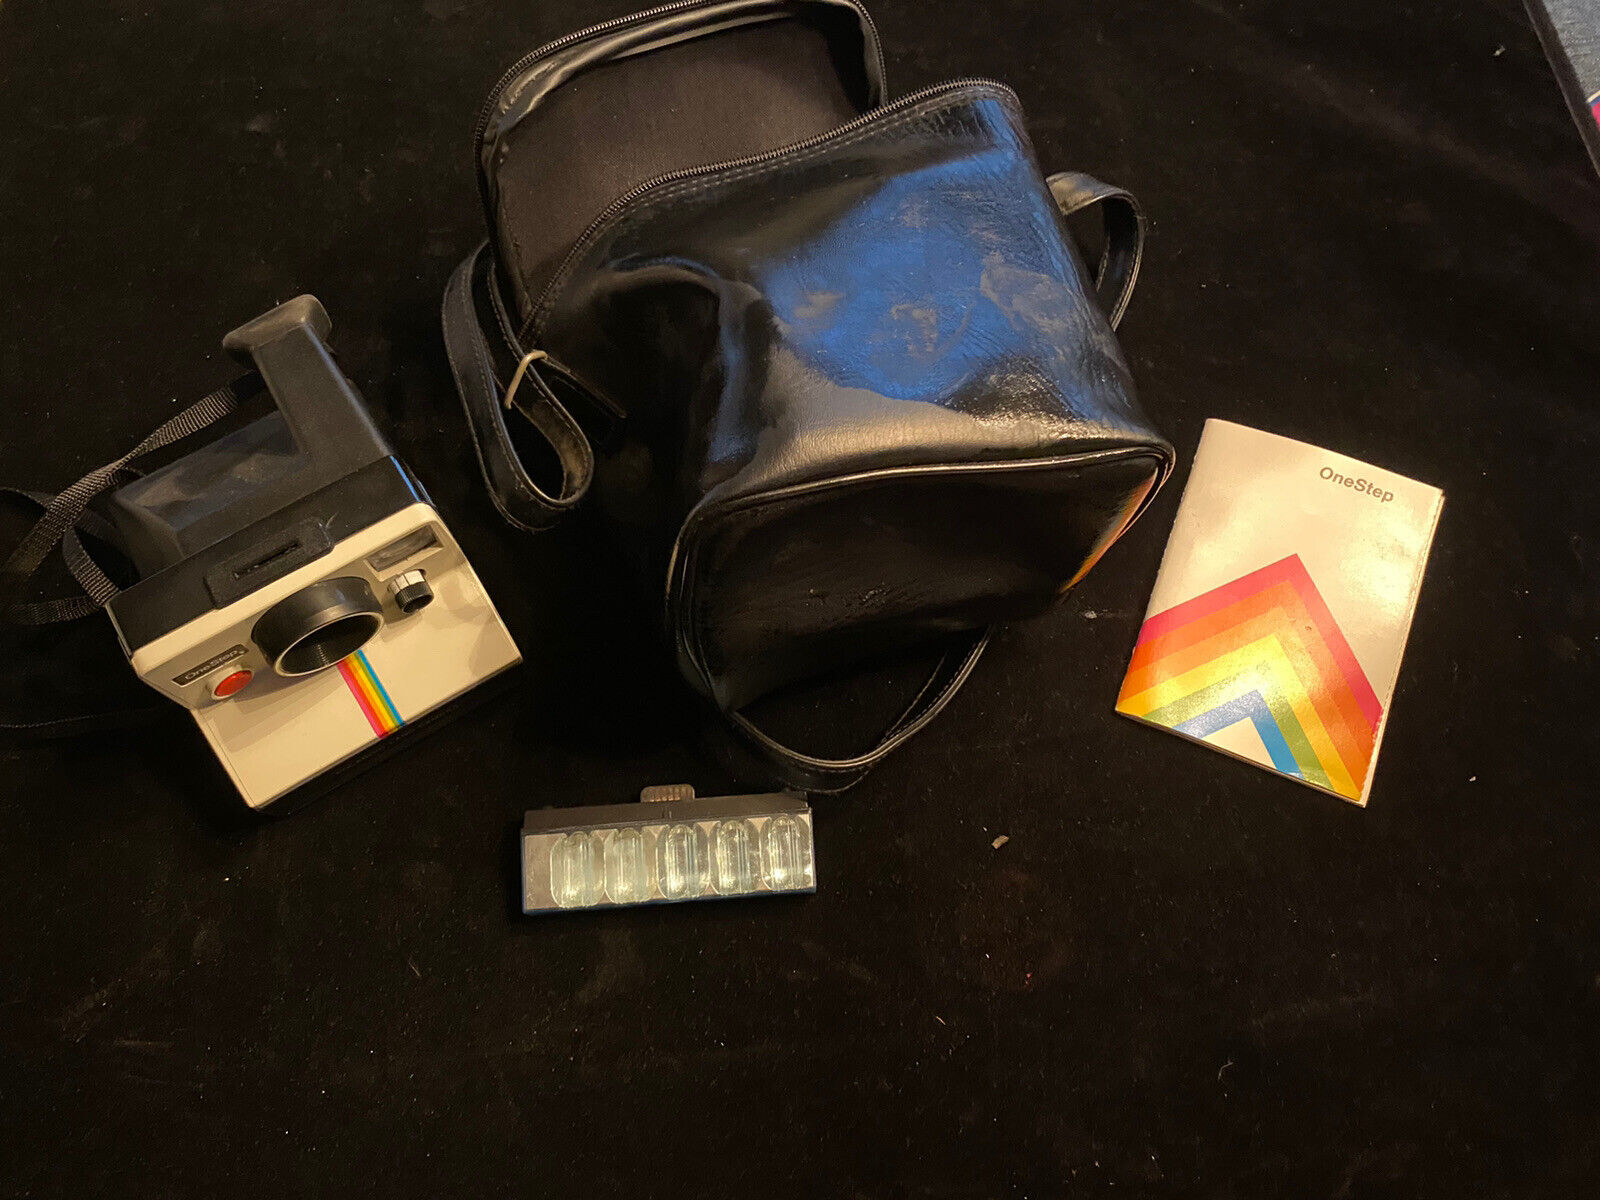 Vintage Polaroid One Max 43% OFF Step Land Camera case Carrying Portland Mall Not Tes with